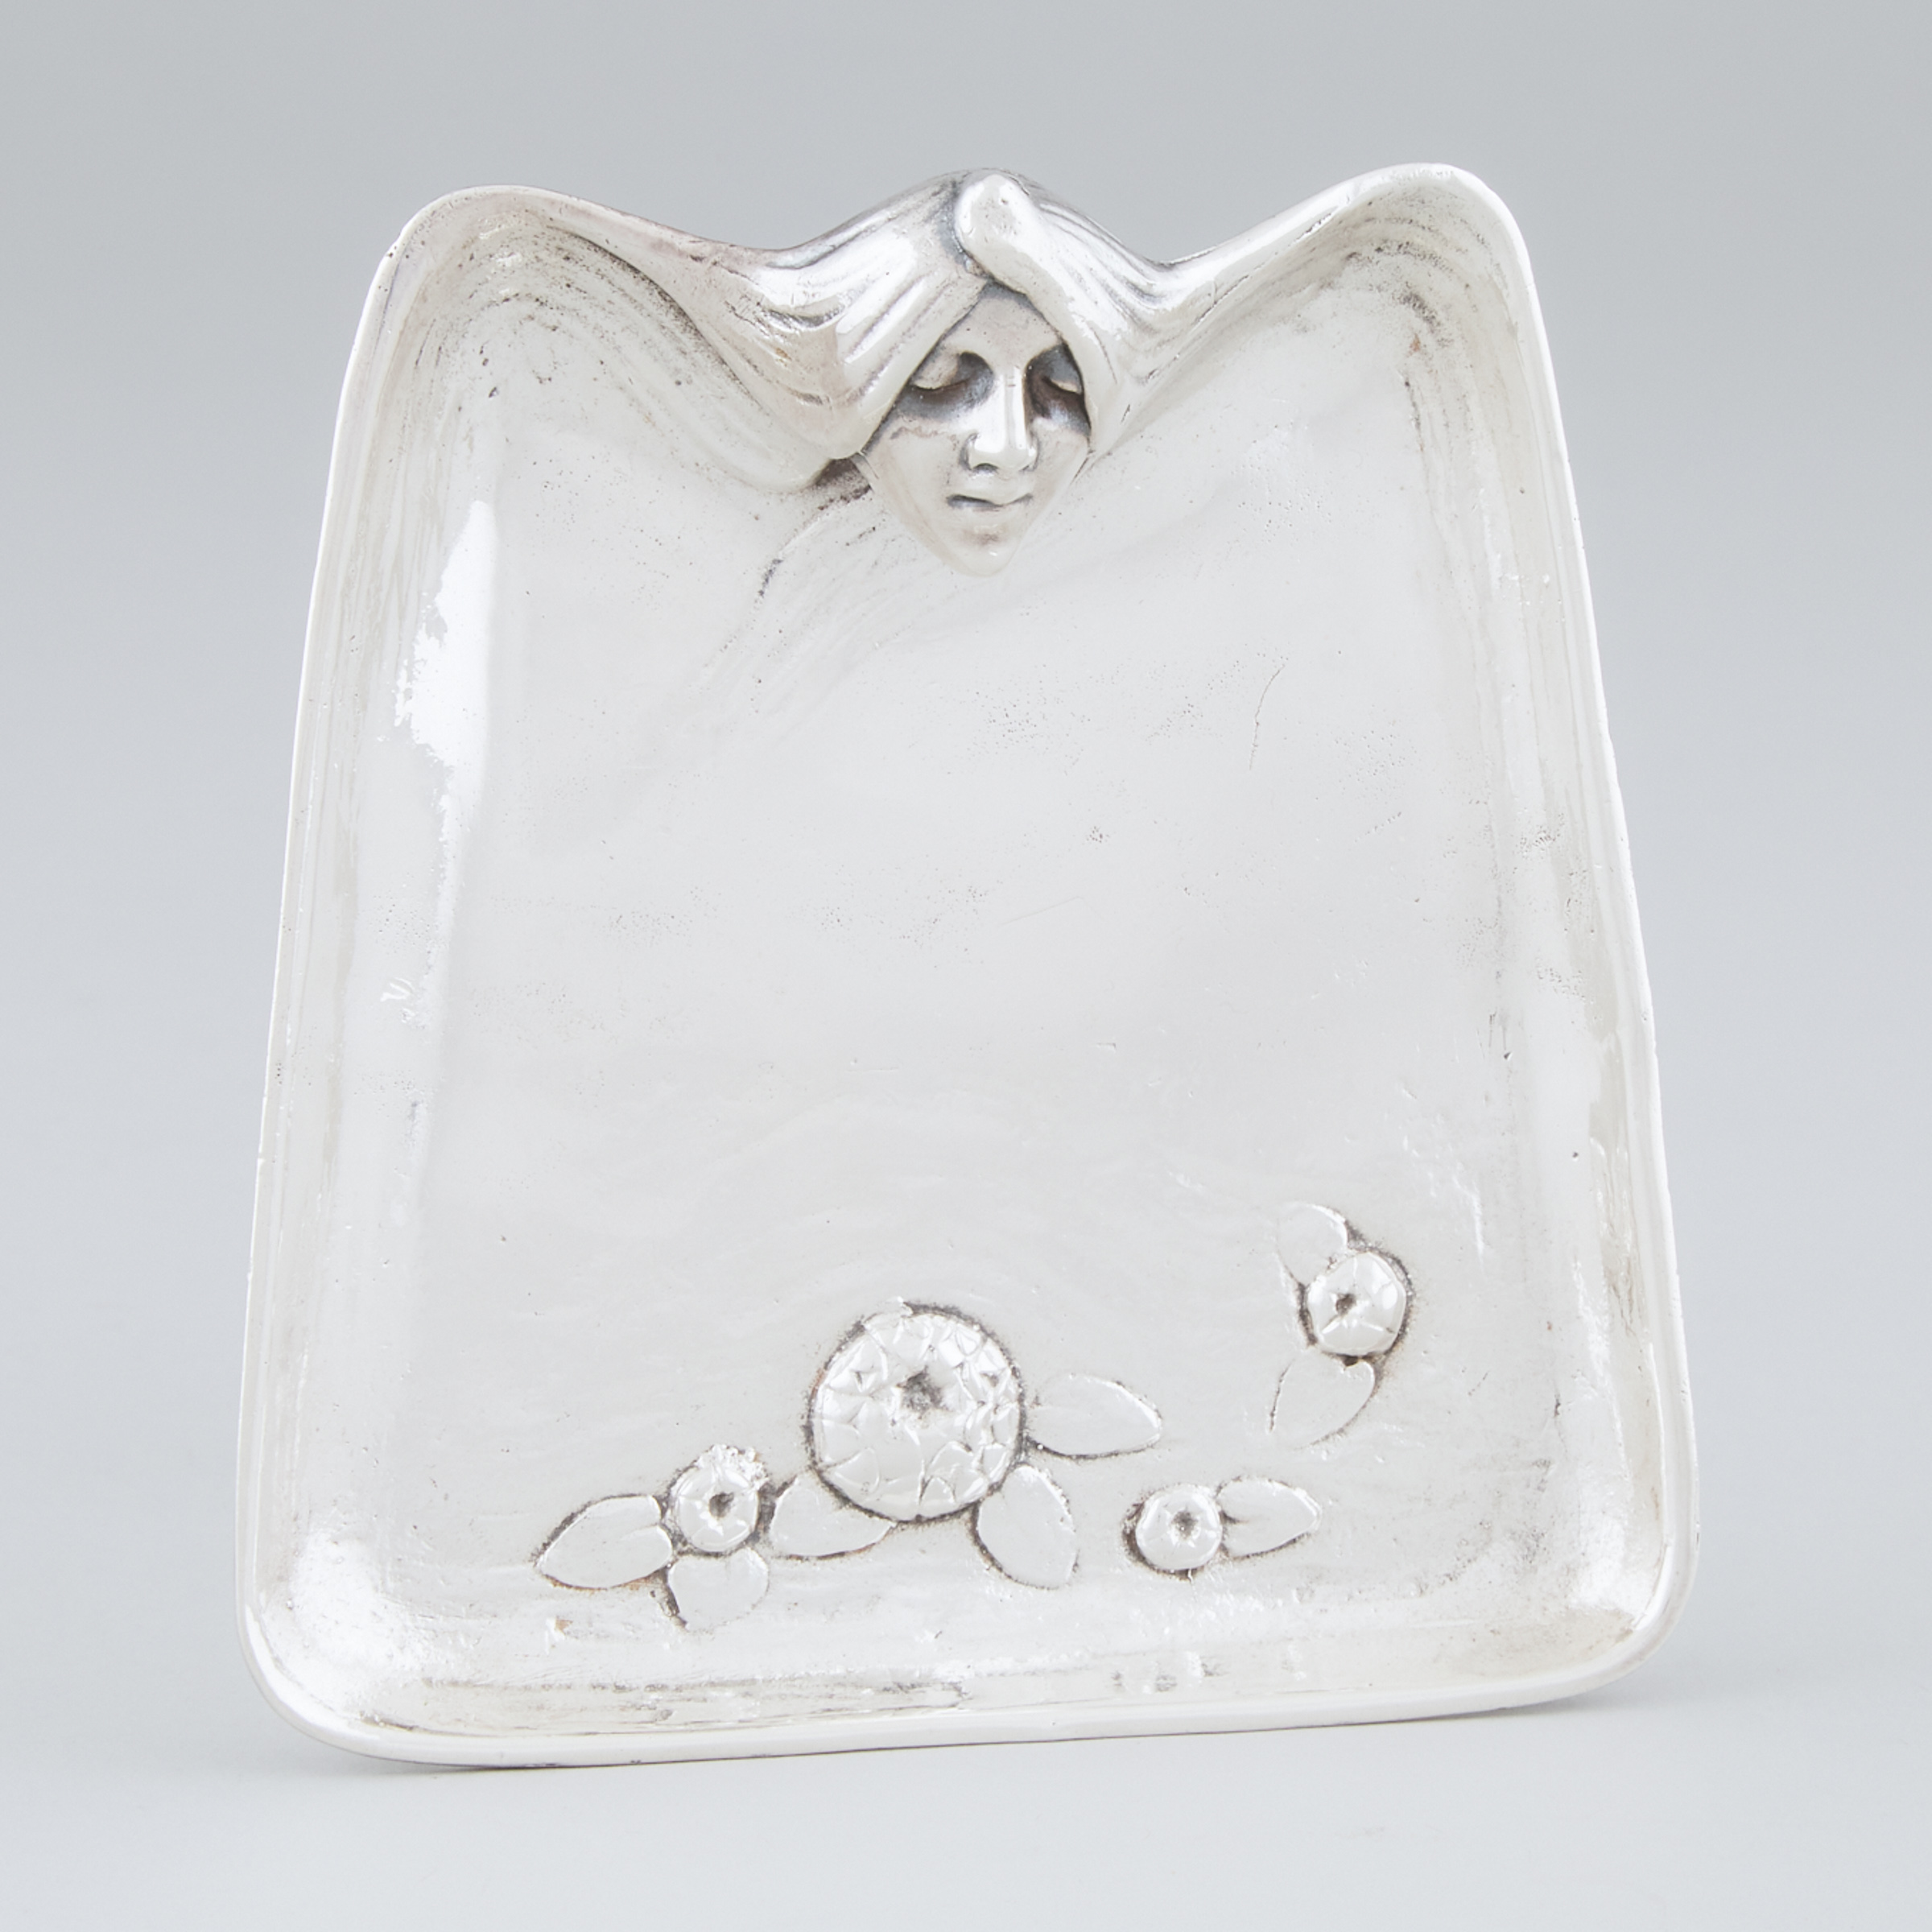 American Silver Nymph and Lillies Vide-Poche, Mauser Mfg. Co., New York, N.Y., c.1900